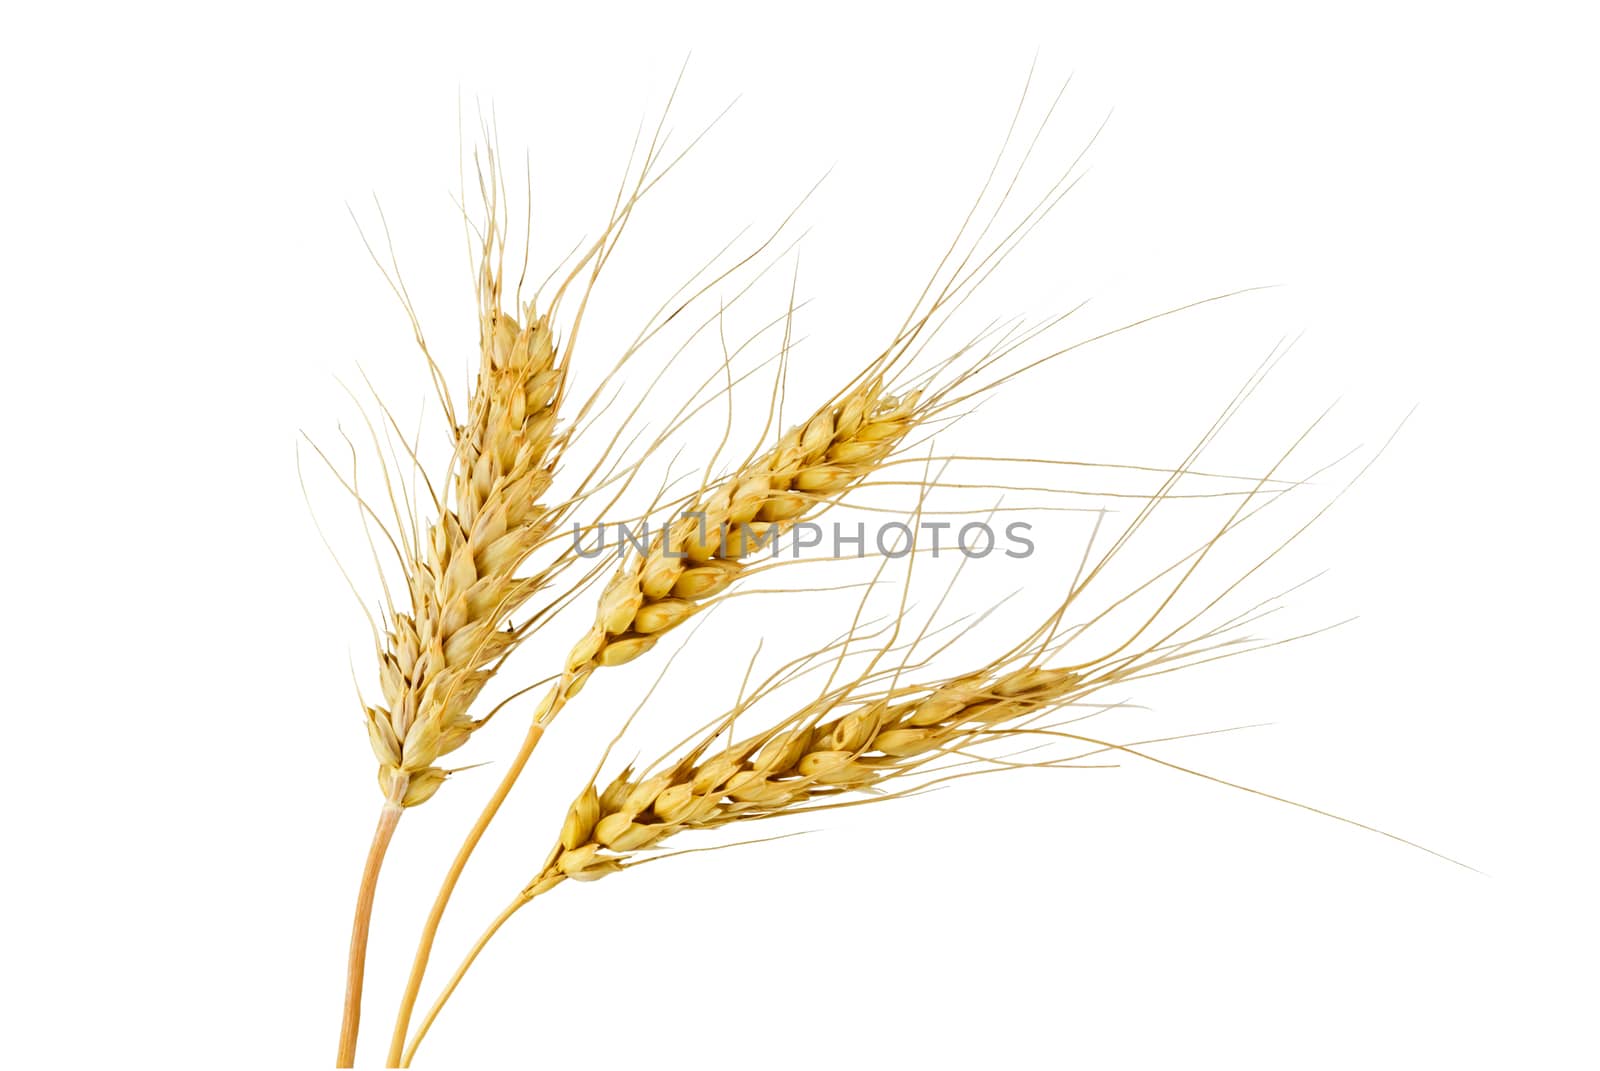 Three rye spikelets on a white background